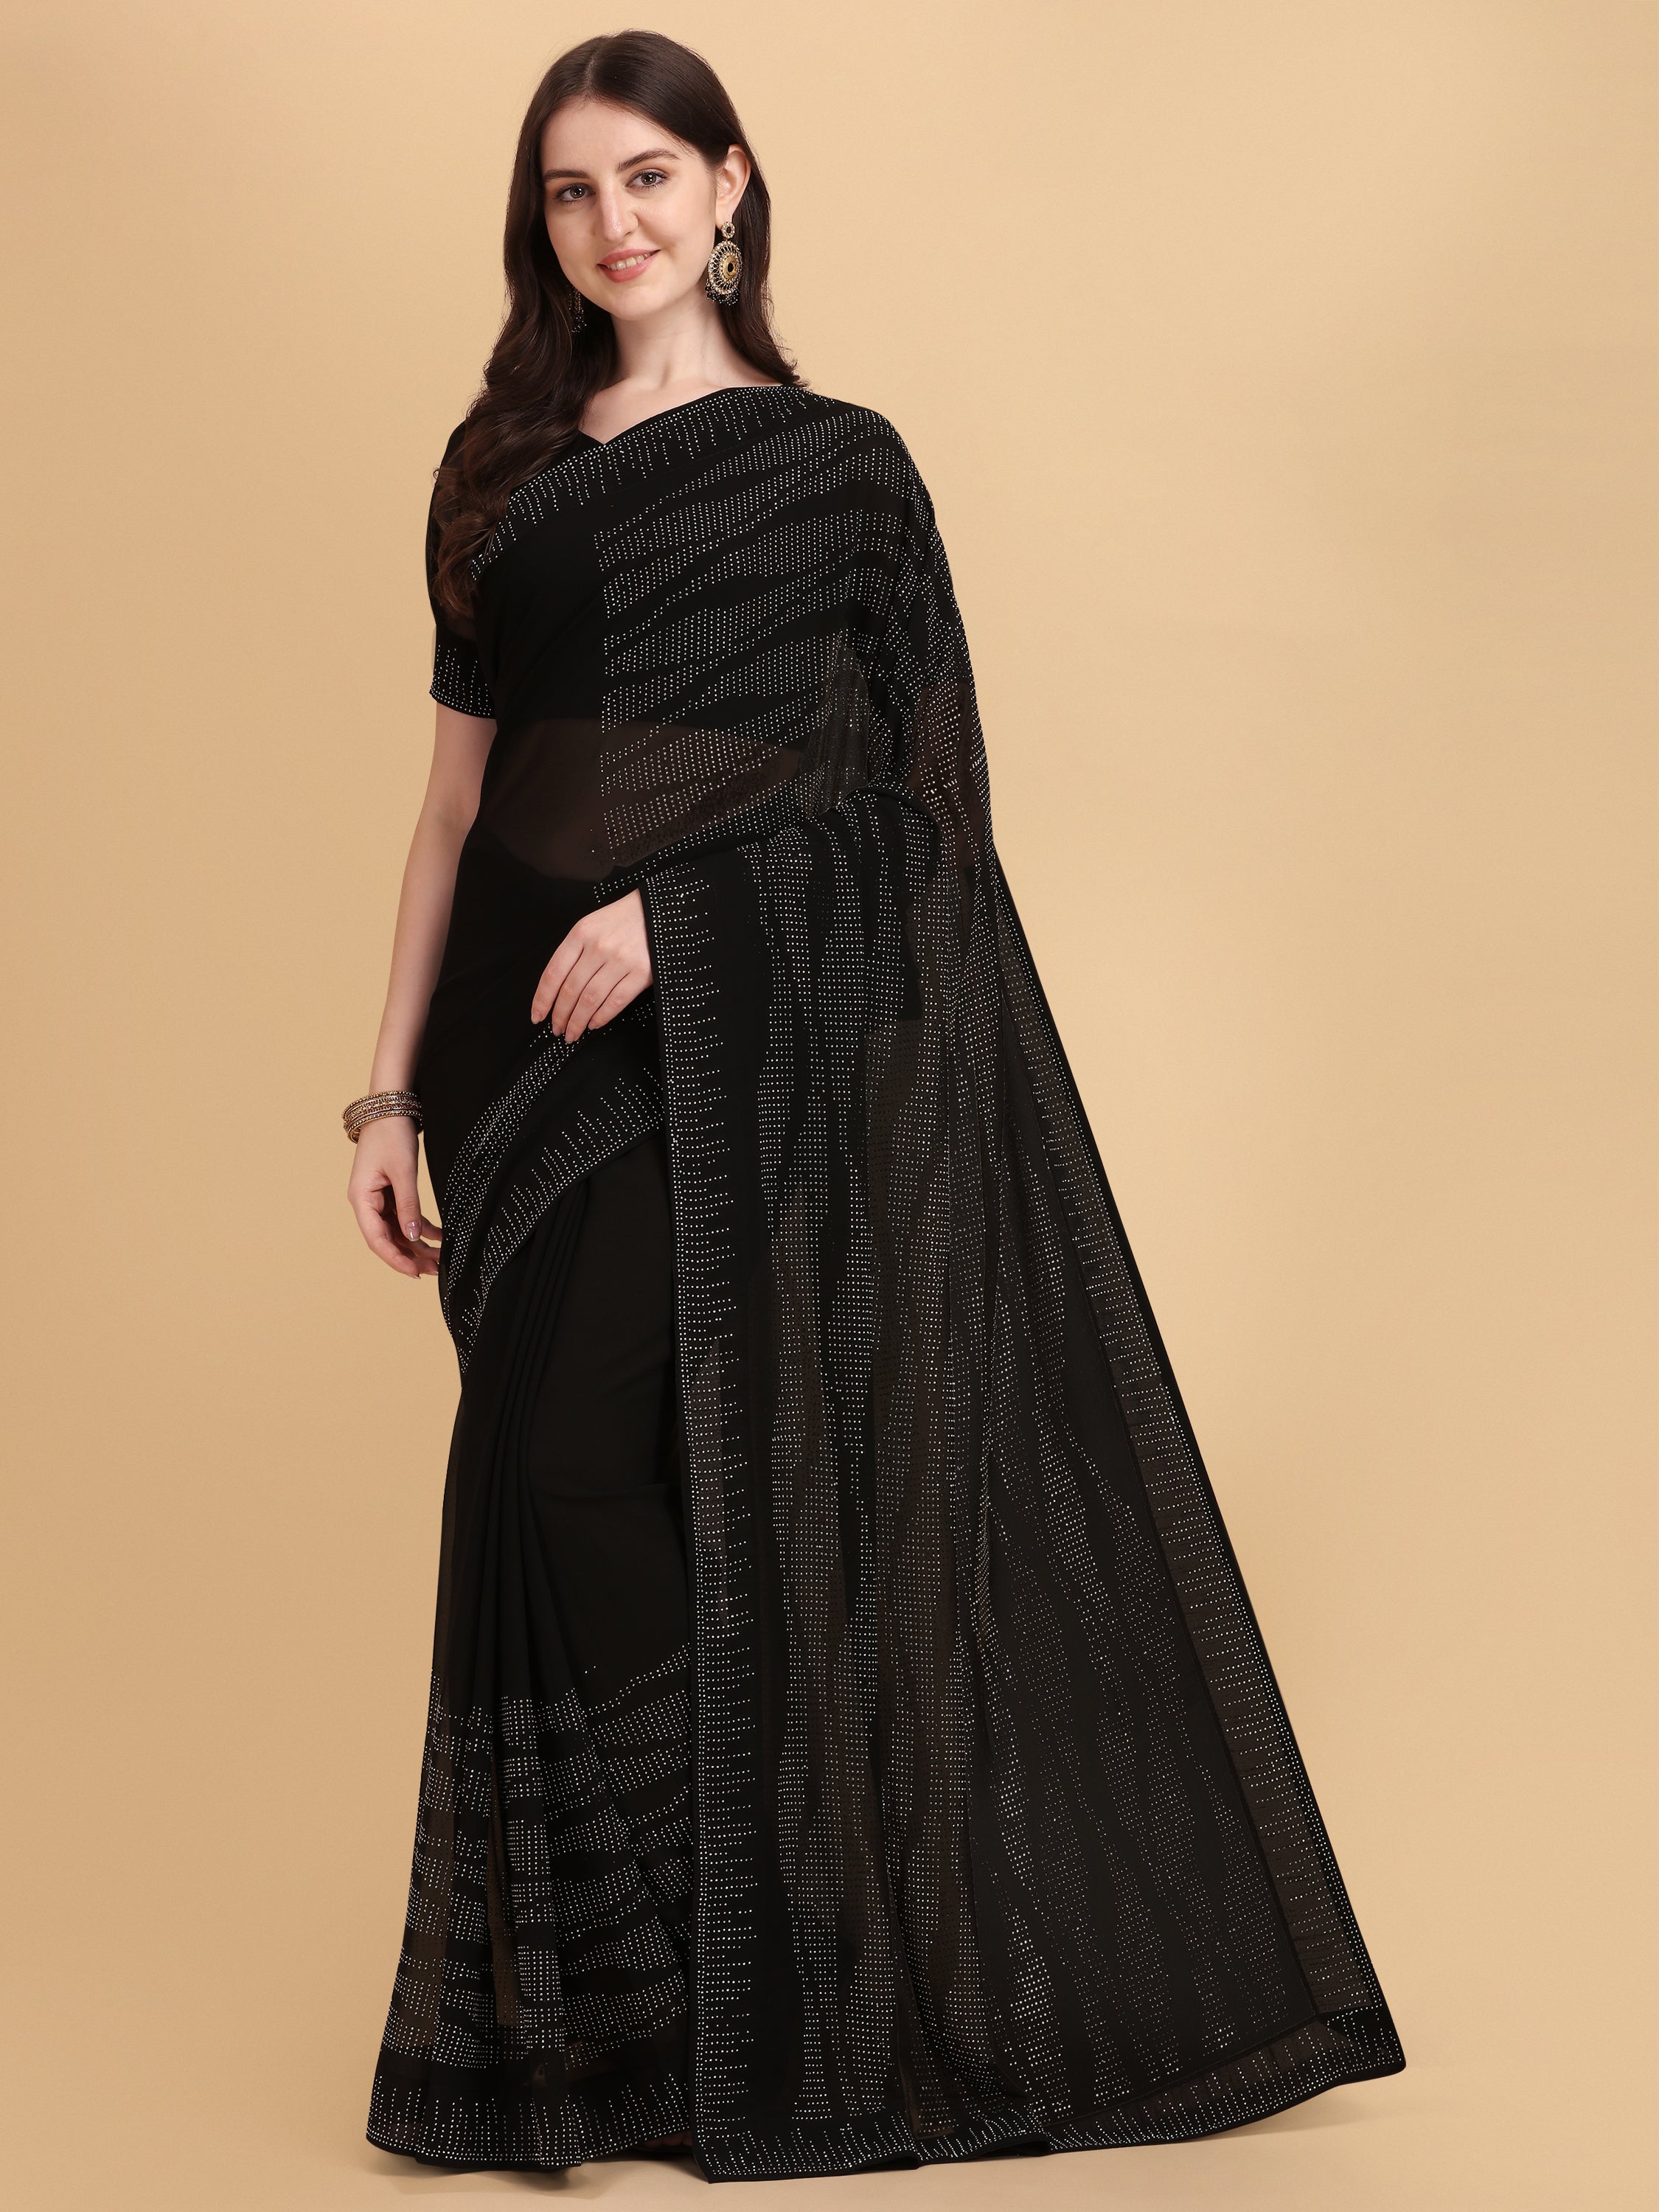 Women's Emblishment Occasion Wear Georgette Saree With Blouse Piece (Black) - NIMIDHYA